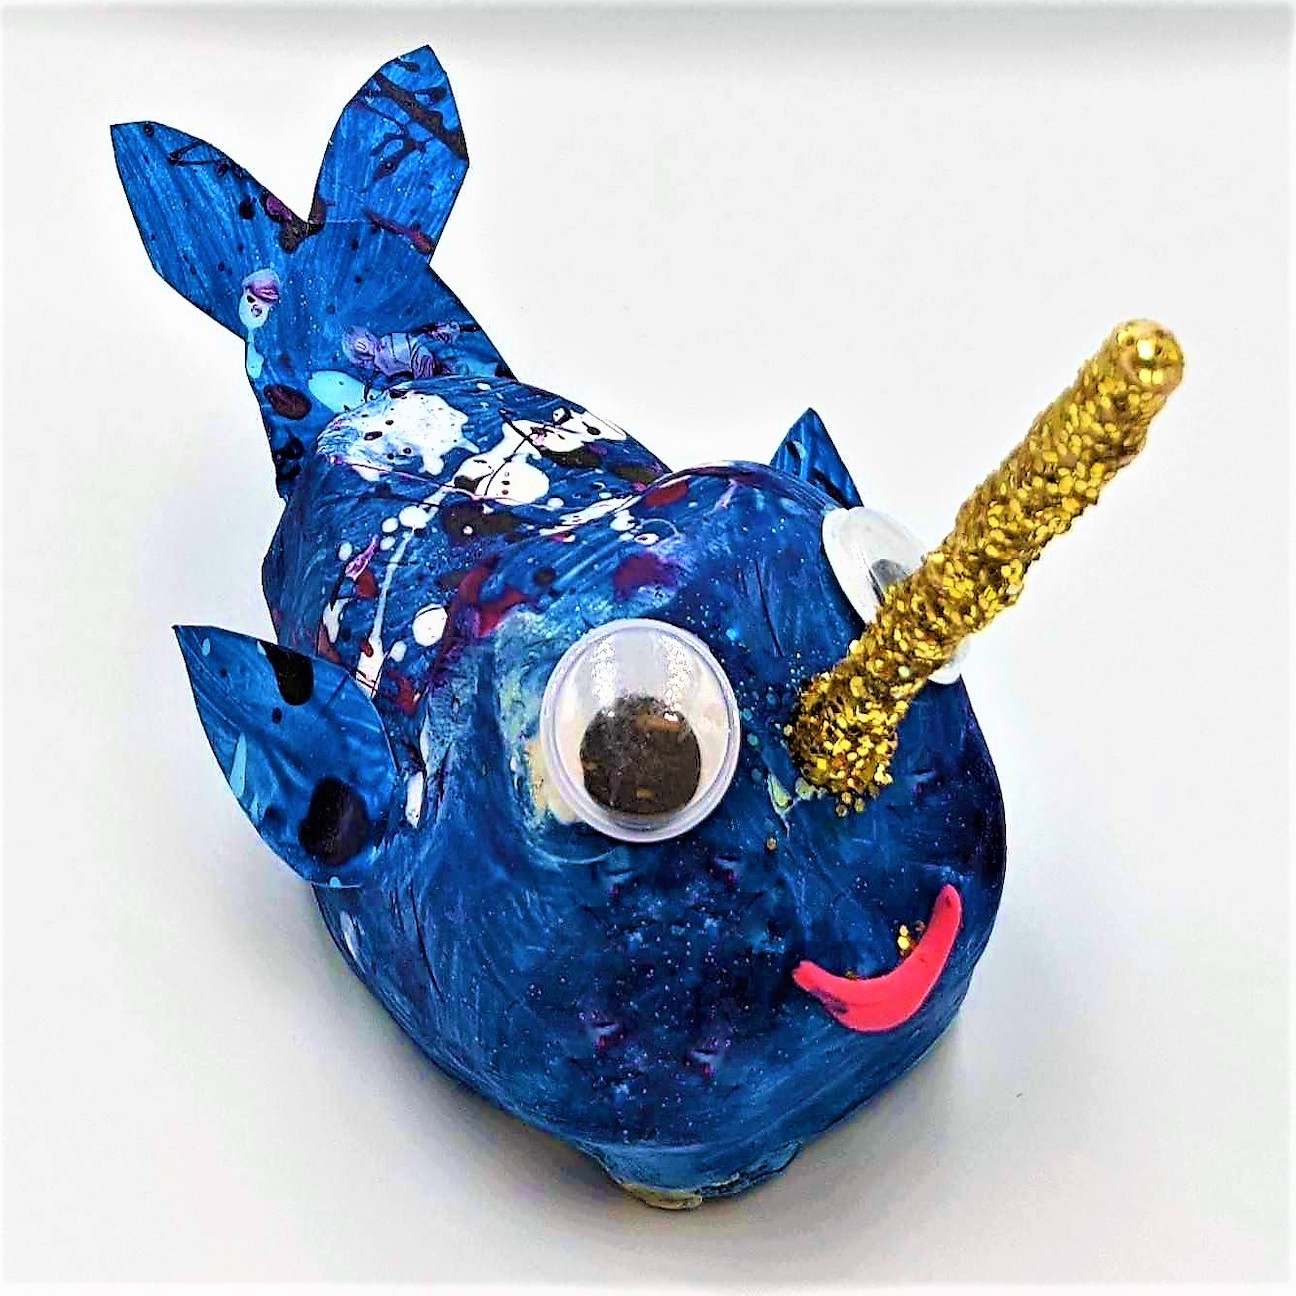 Kidcreate Studio - Chicago Lakeview, Nifty Narwhal Art Project